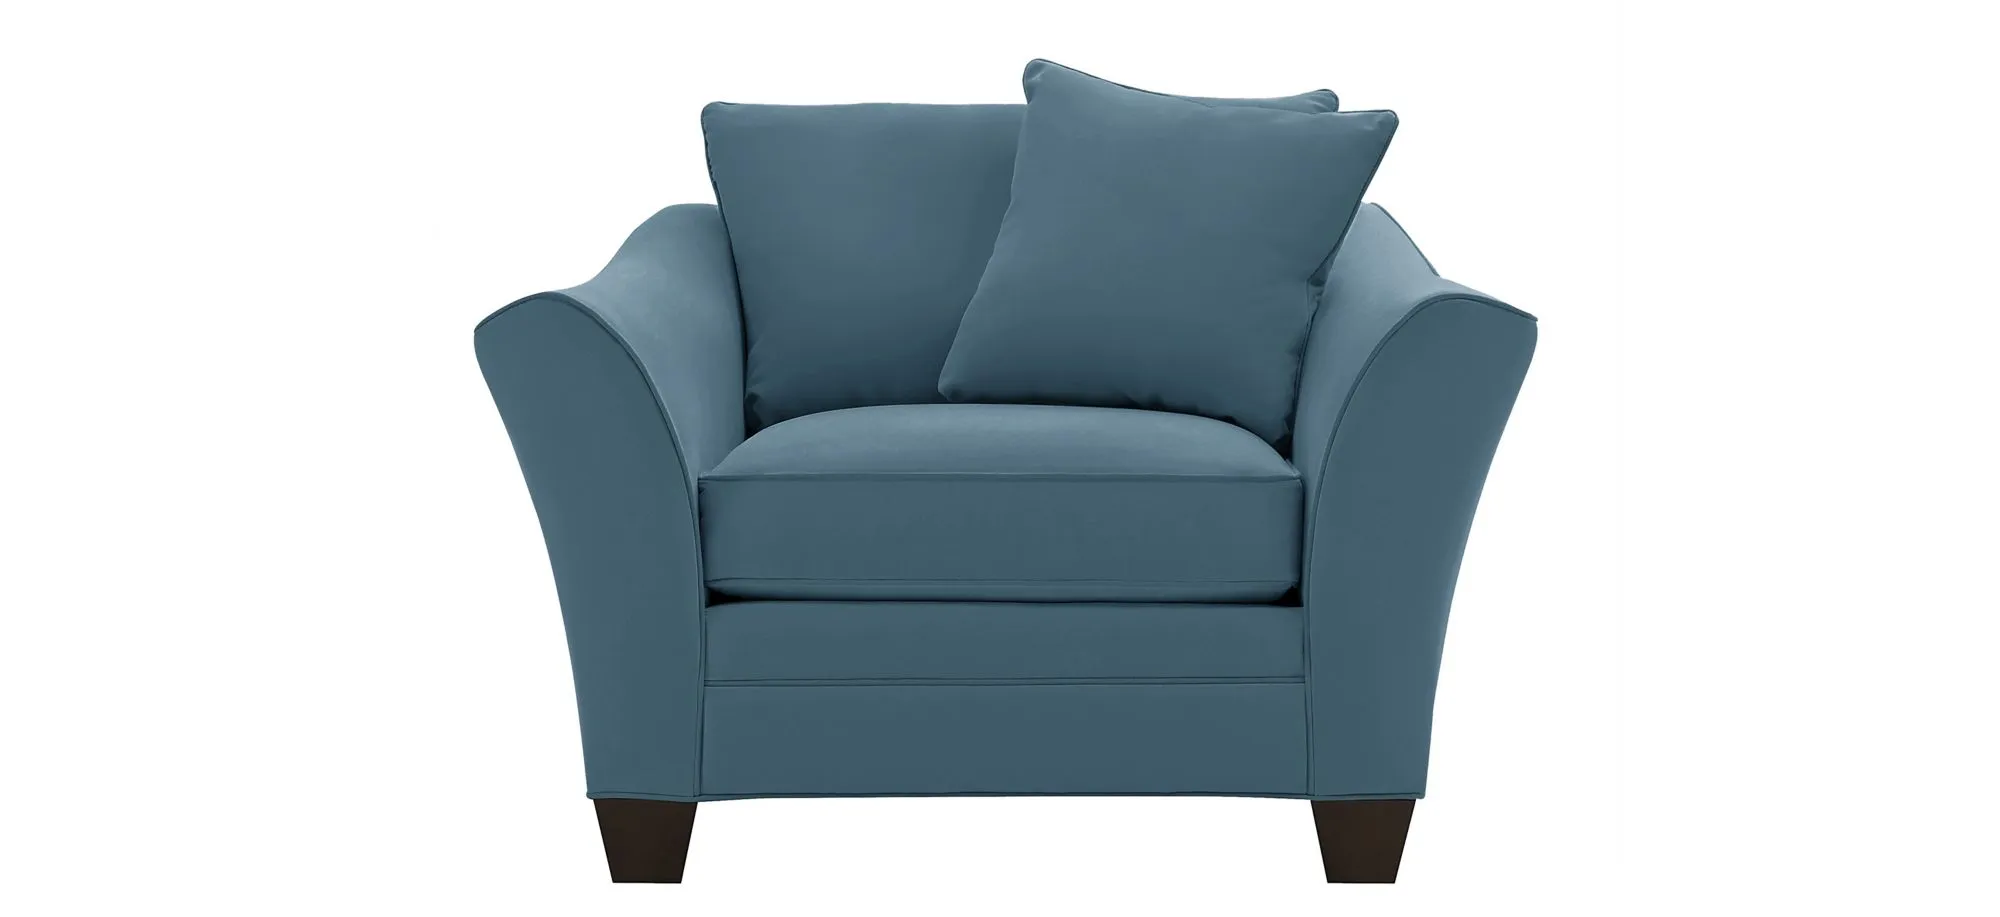 Briarwood Chair in Suede So Soft Indigo by H.M. Richards